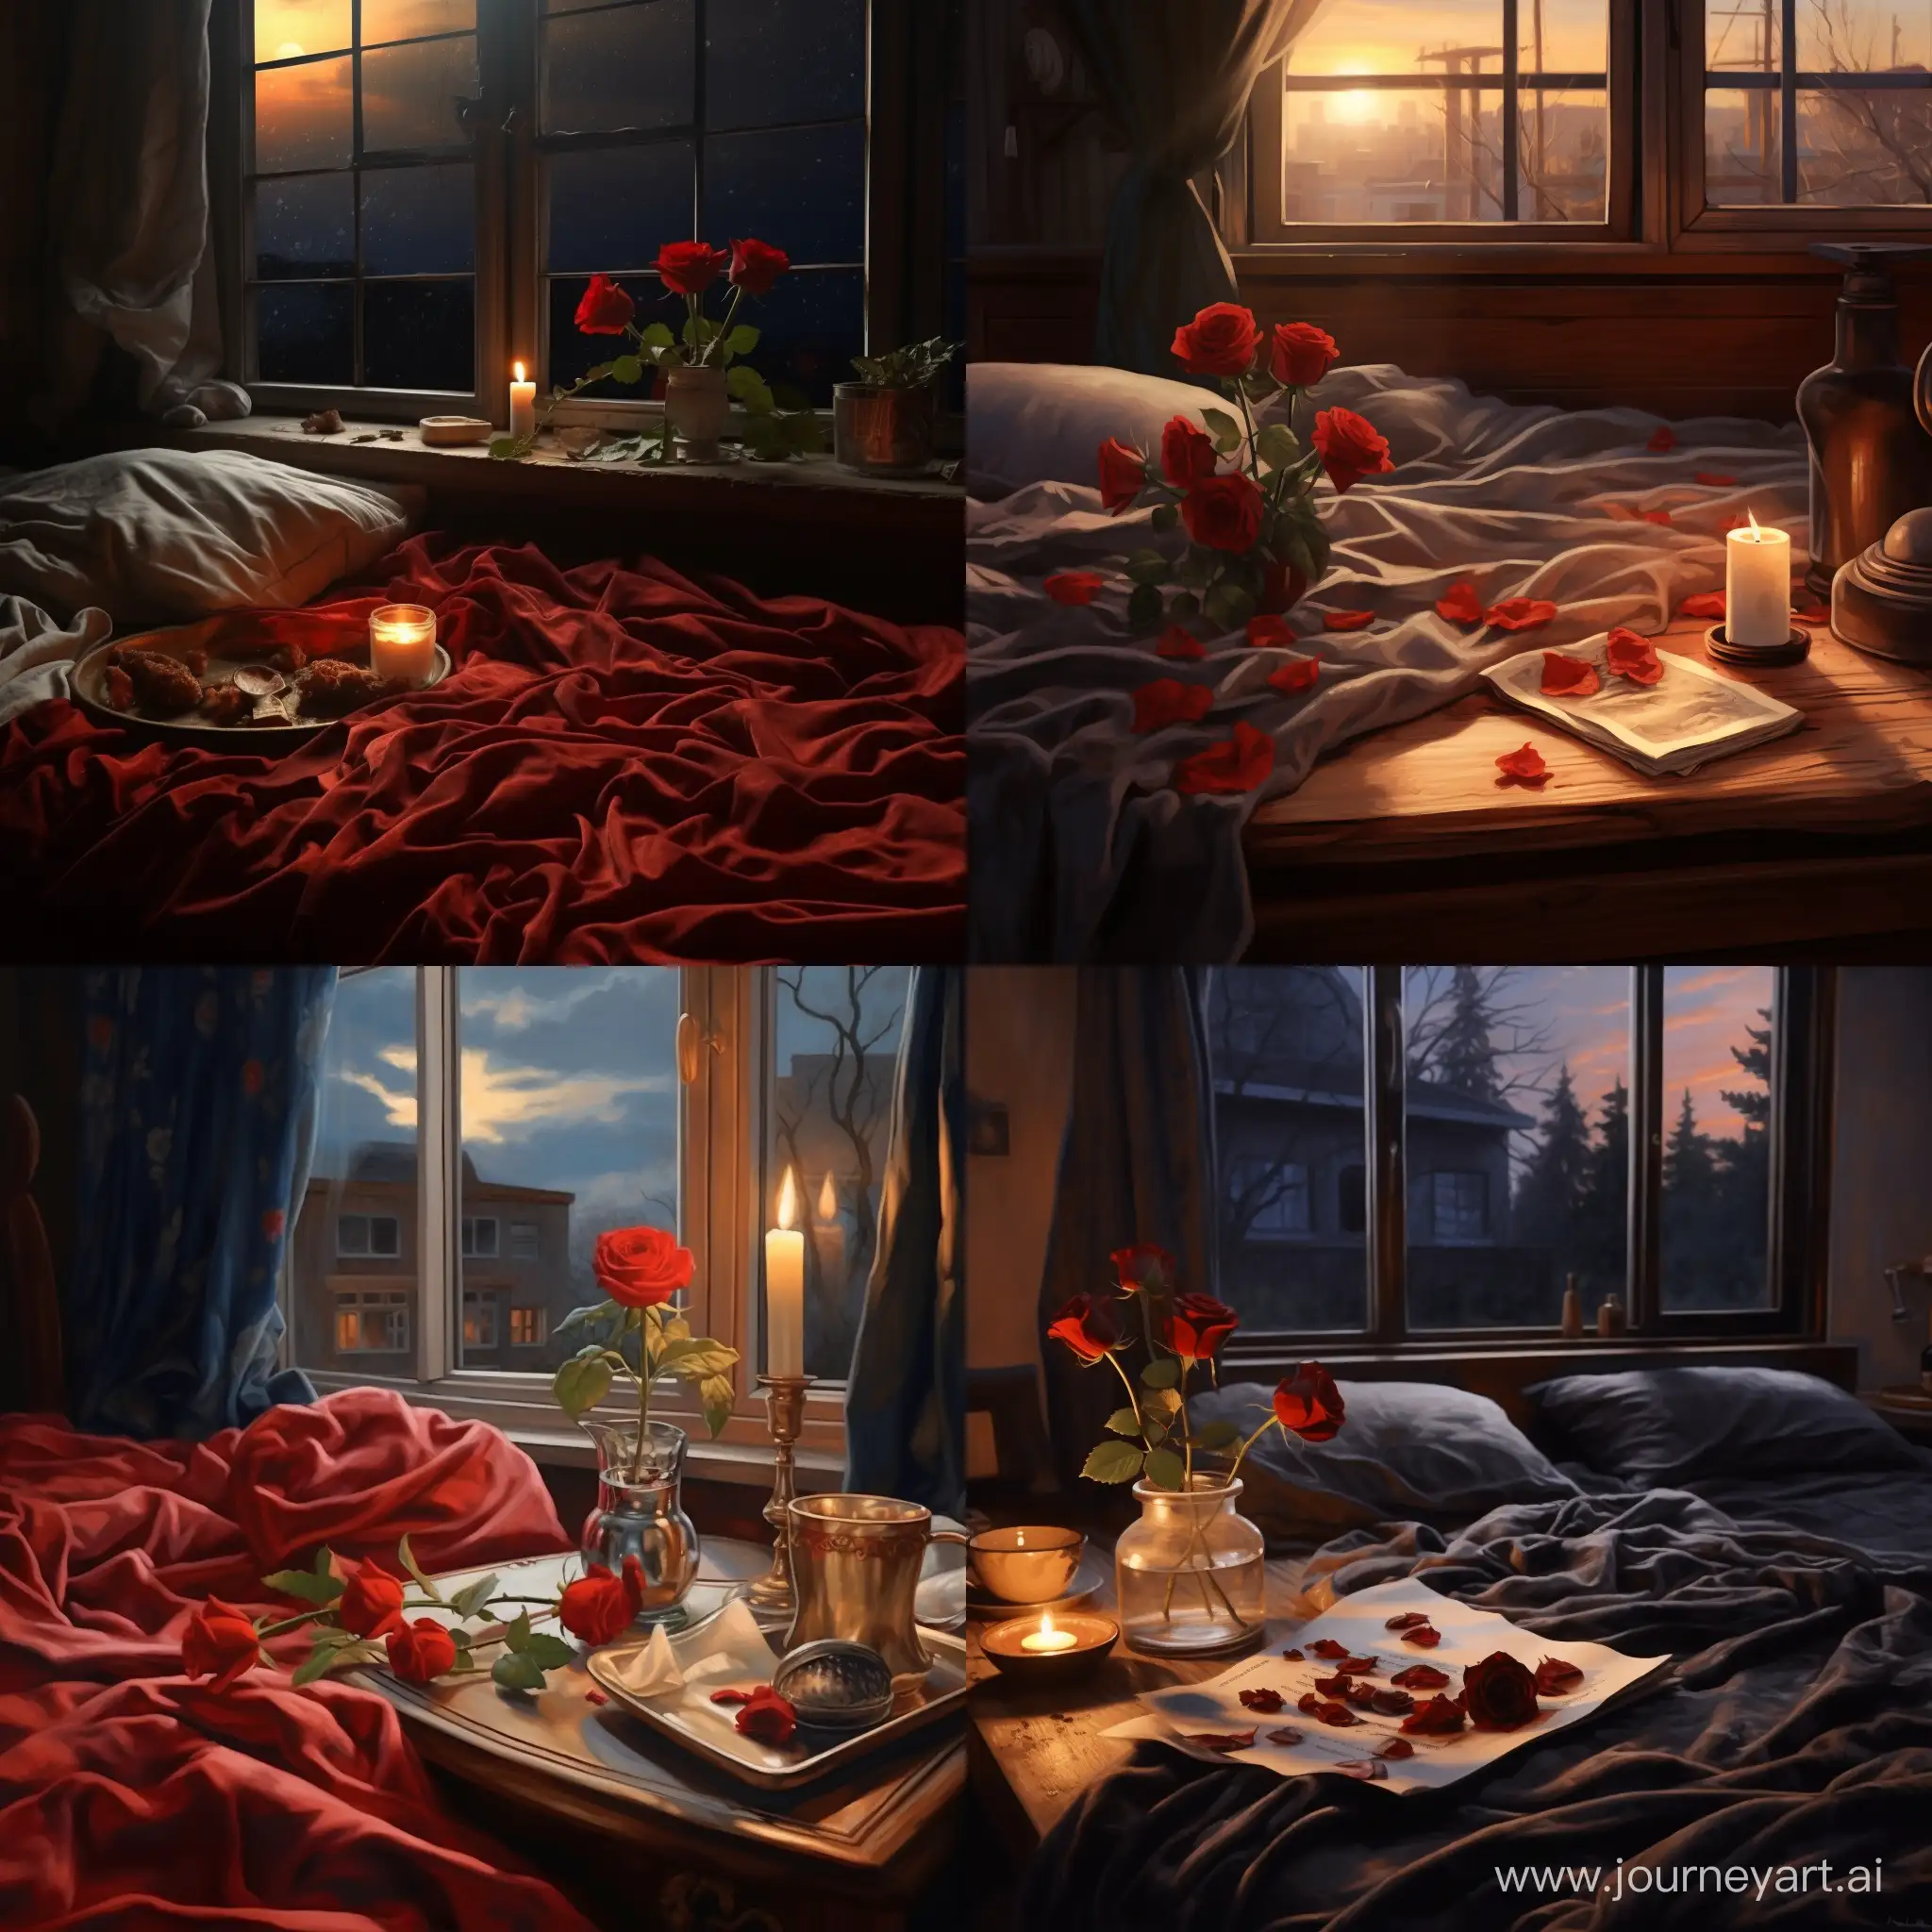 Romantic-Night-Red-Rose-Candlelit-Ambiance-and-Rumpled-Bed